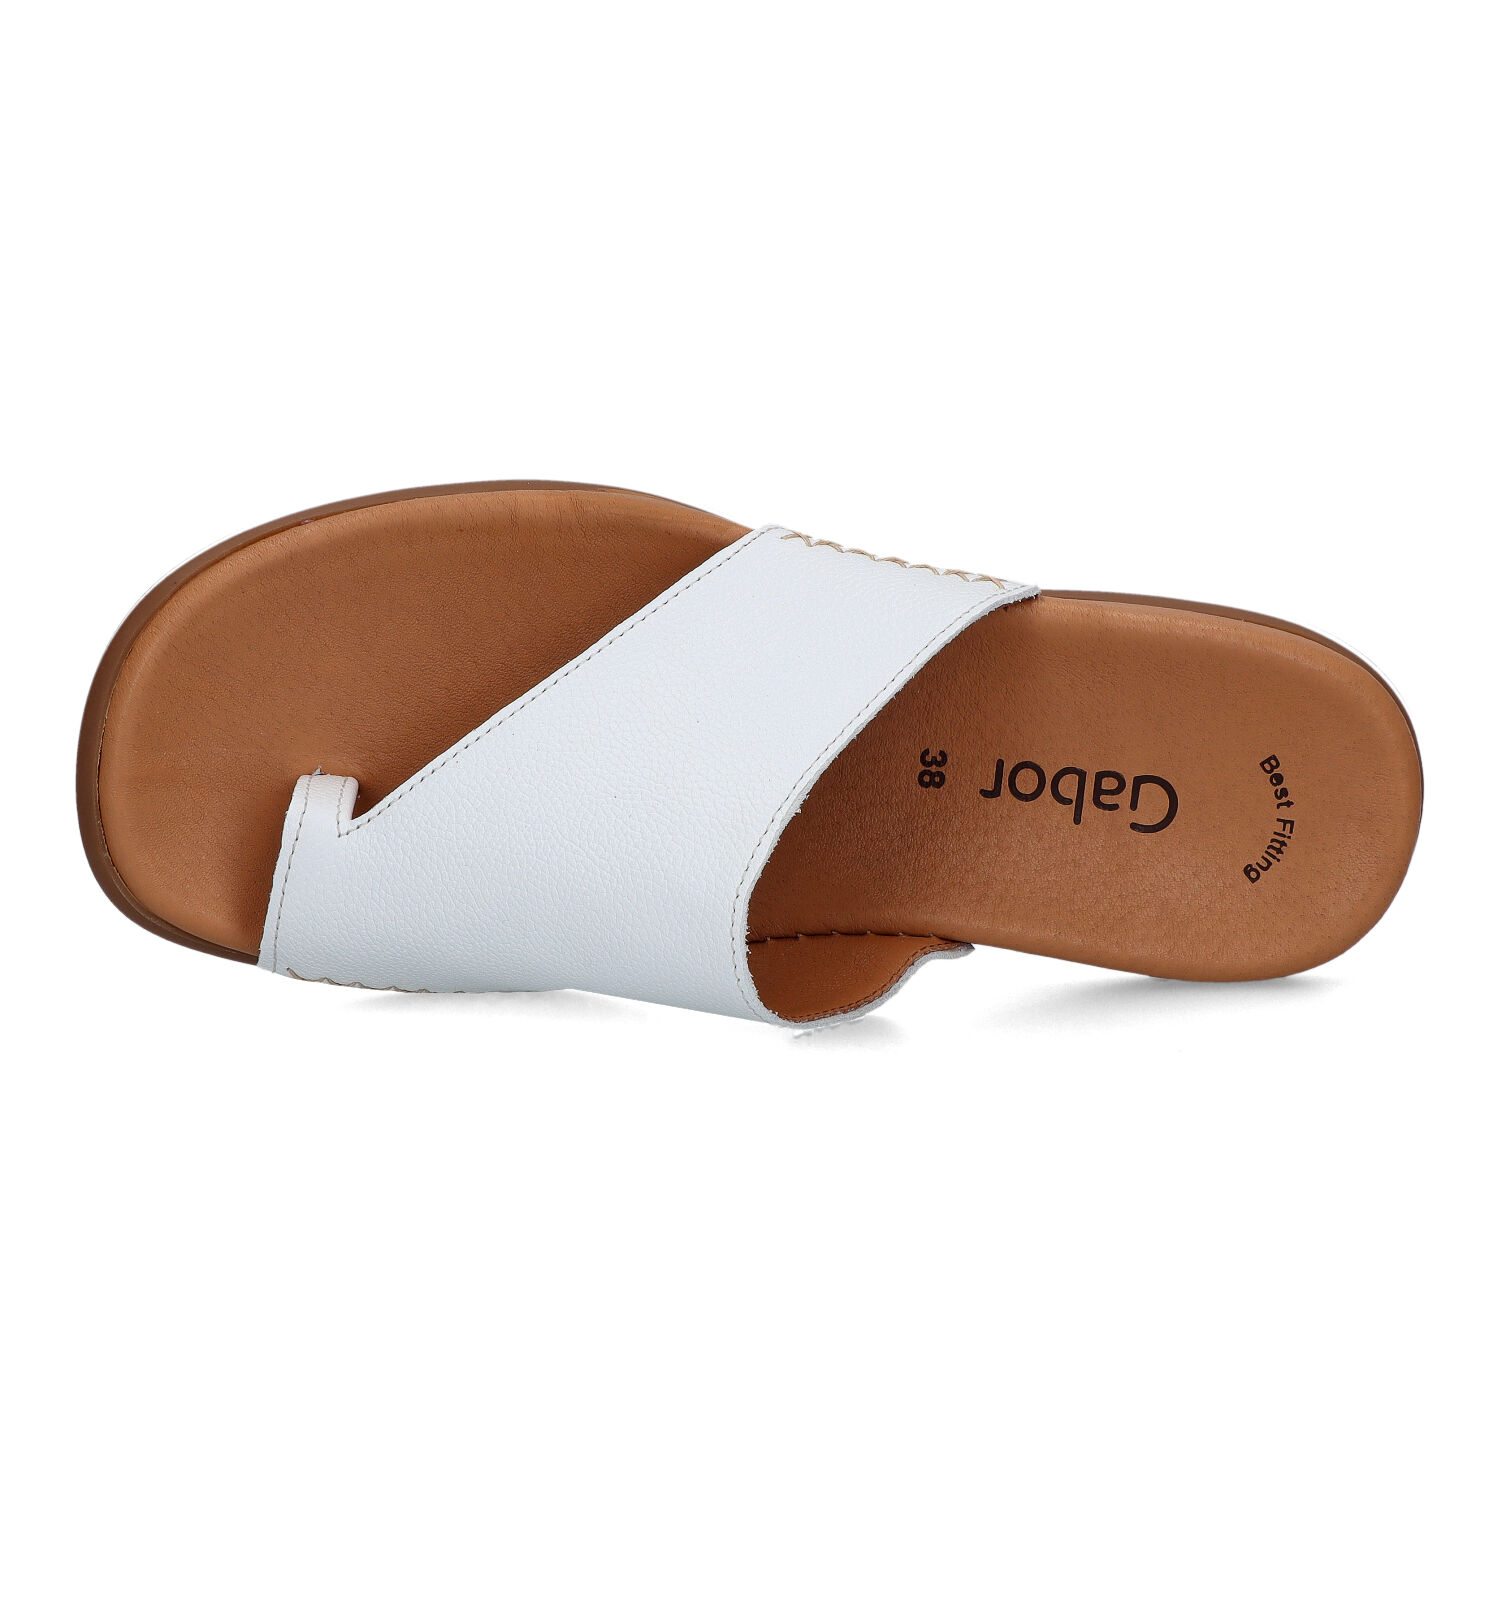 huiselijk campagne Madeliefje Gabor Best Fitting Witte Teenslippers | Dames Slippers